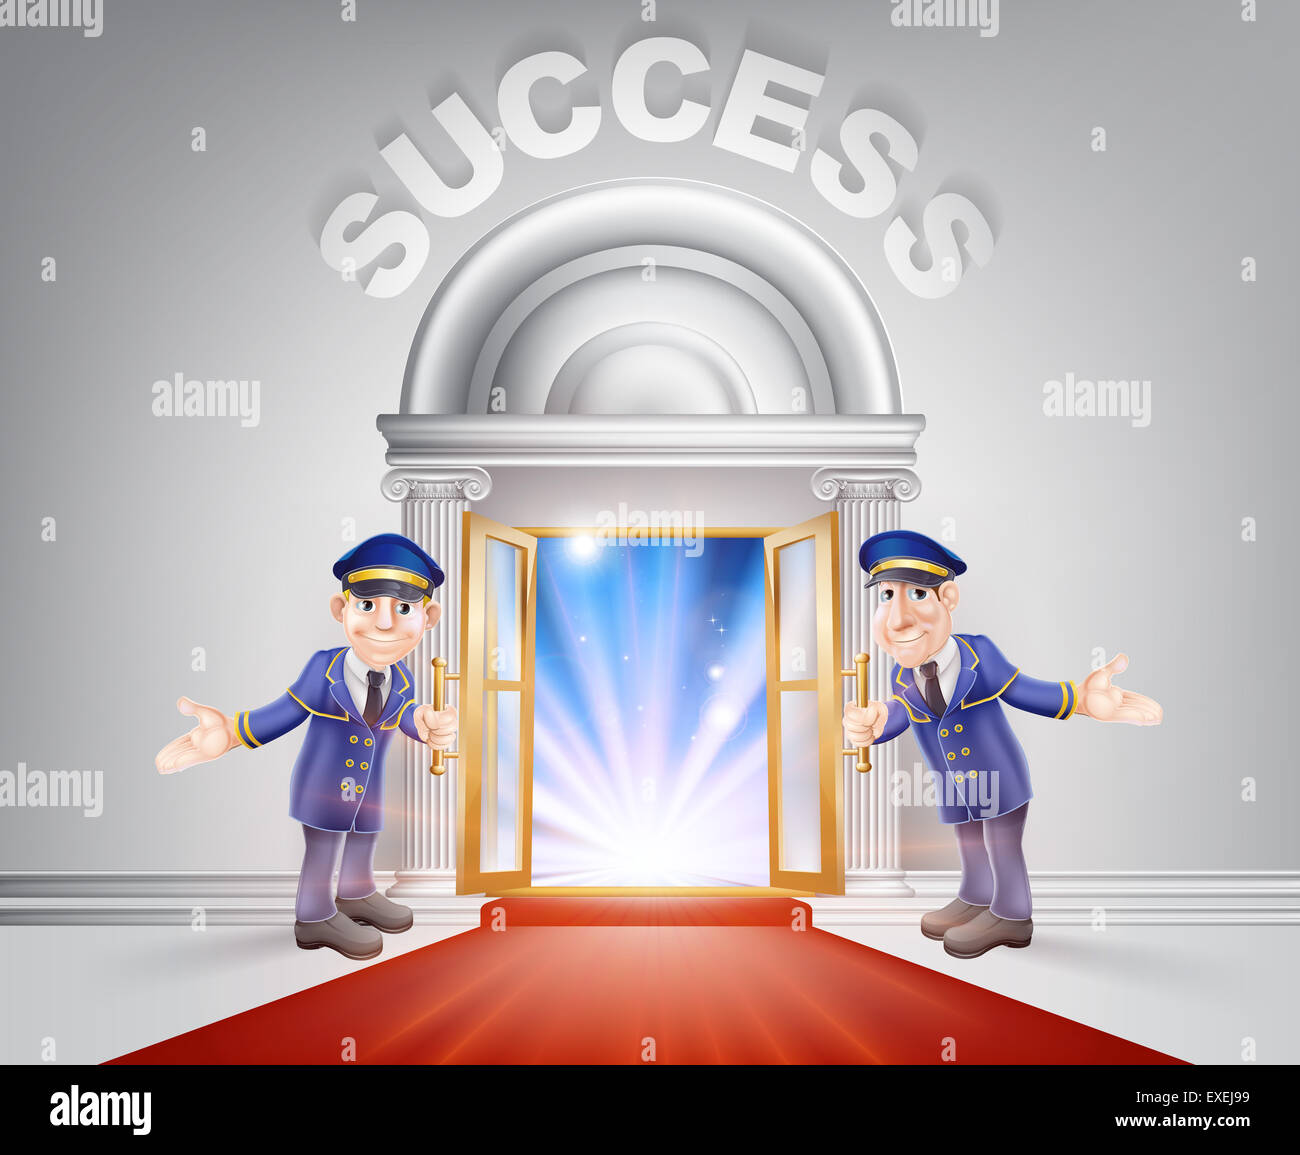 Success Door concept of a doormen holding open a red carpet entrance to success with light streaming through it. Stock Photo